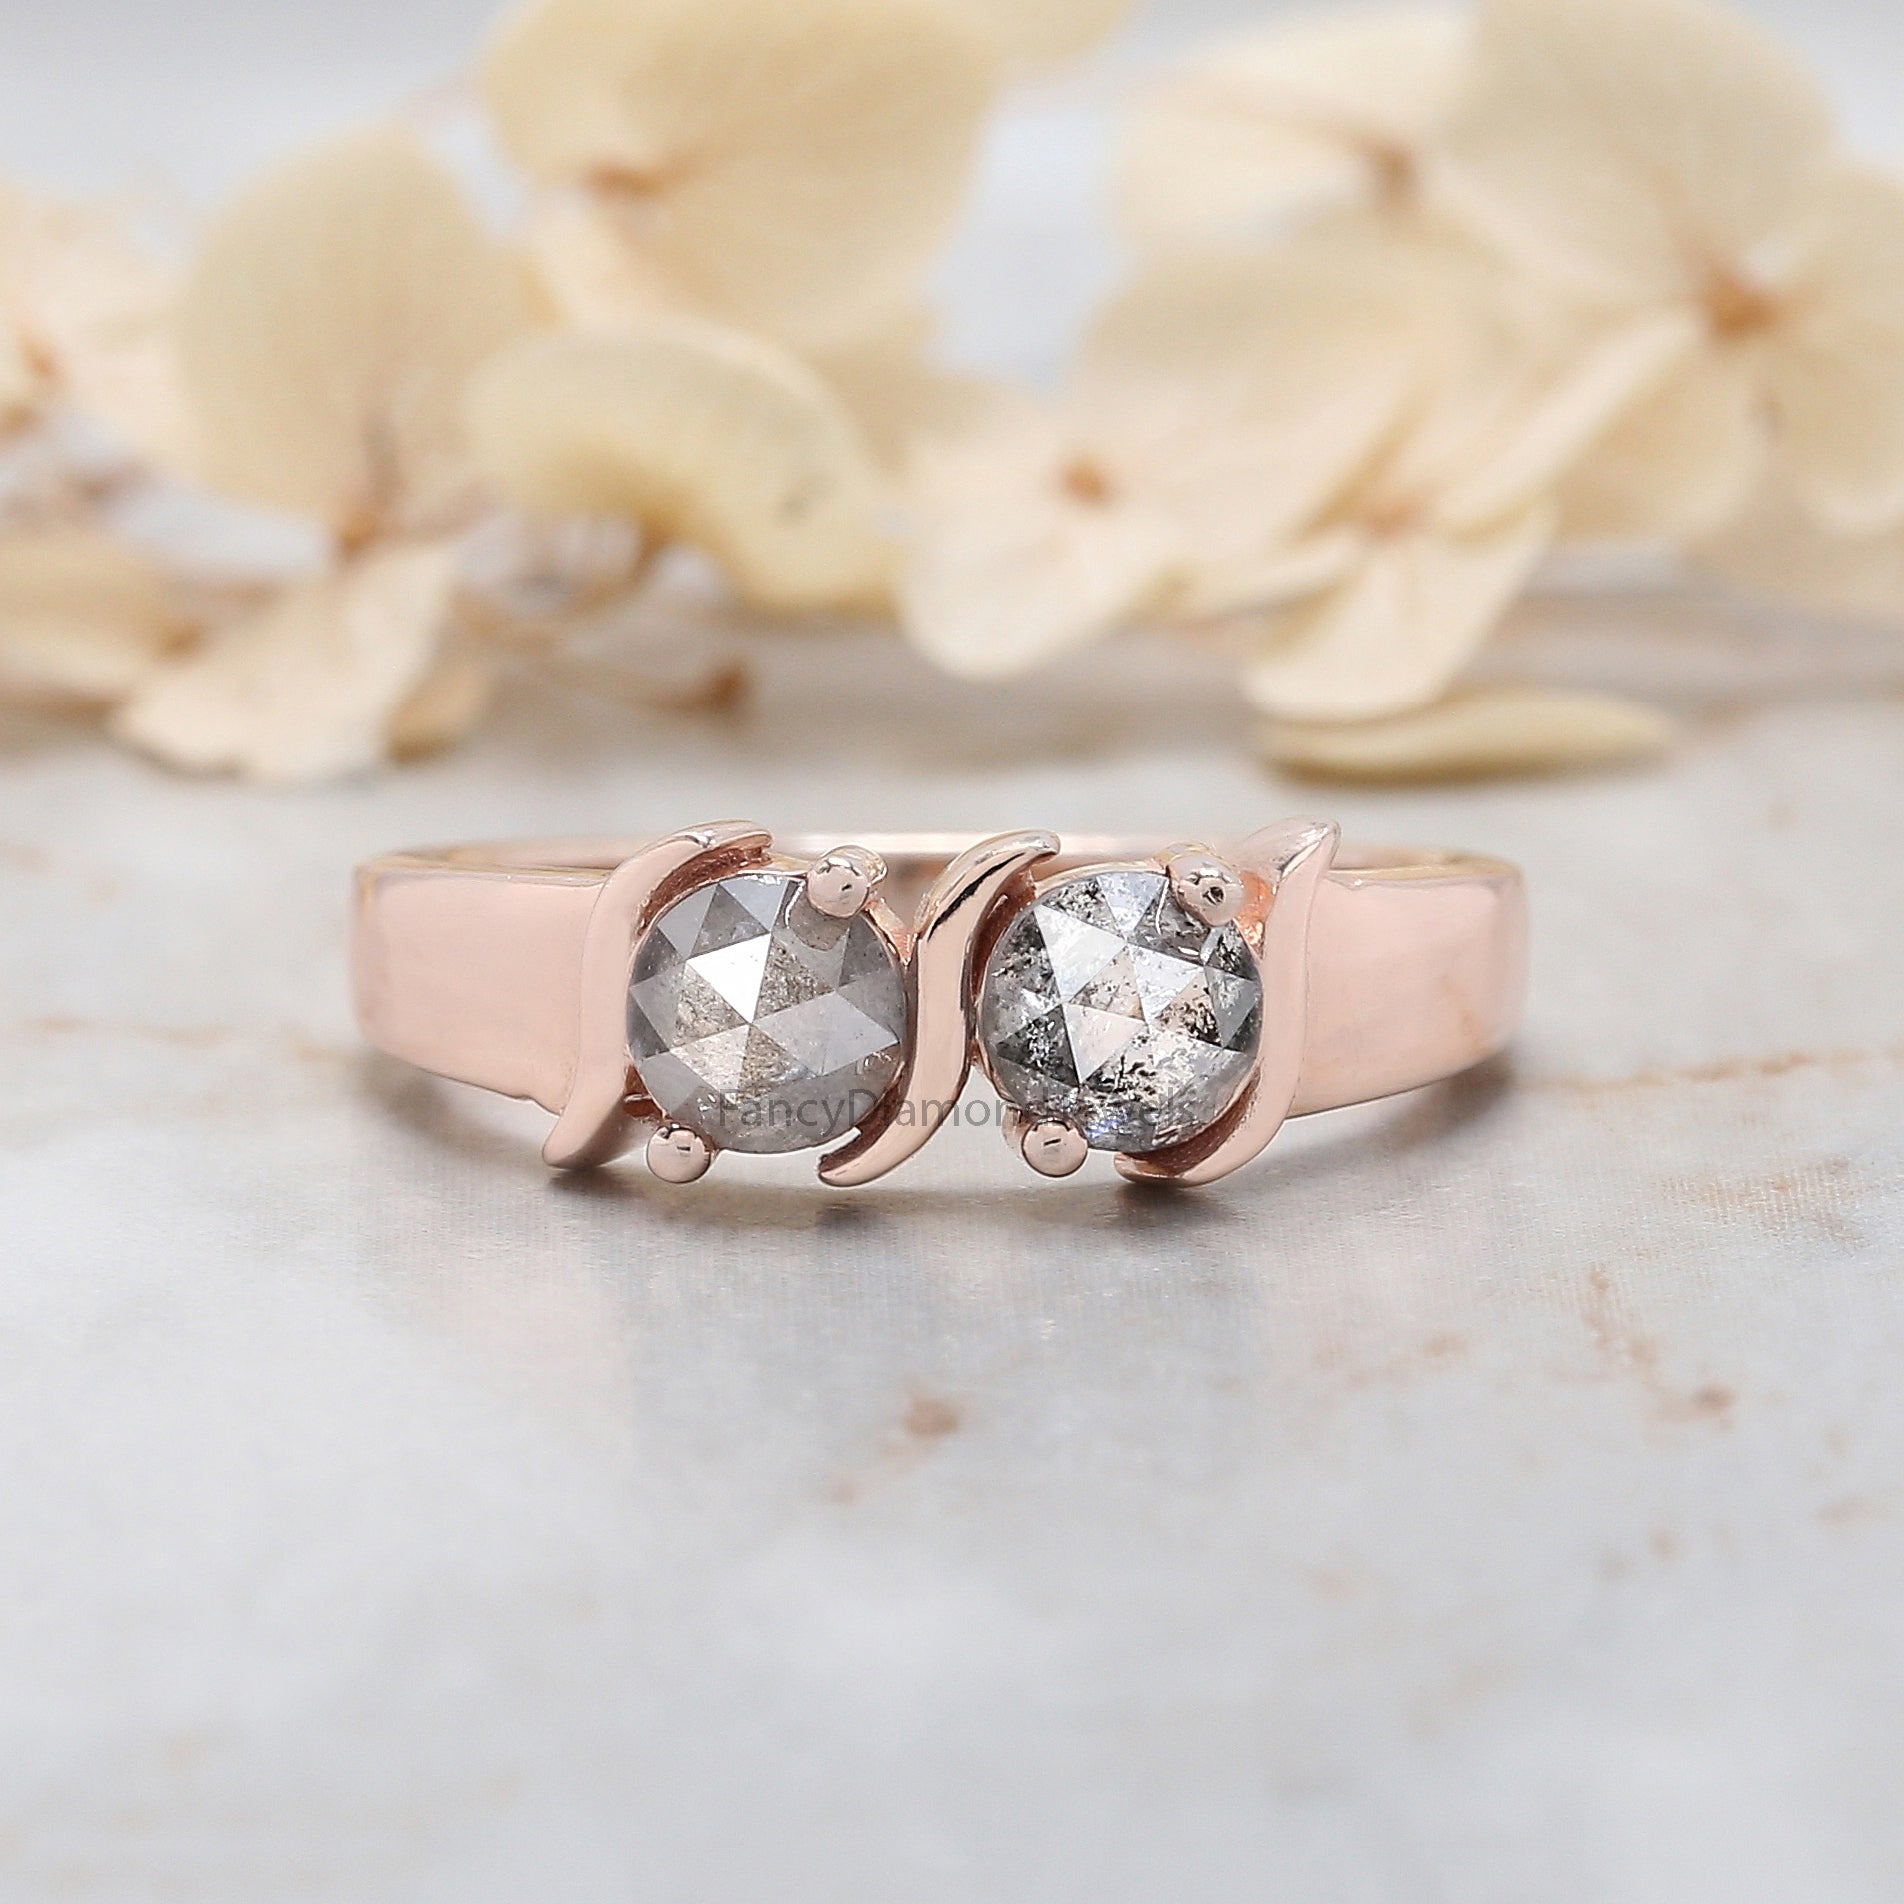 Round Rose Cut Salt And Pepper Diamond Ring 0.95 Ct 4.60 MM Round Diamond Ring 14K Rose Gold Silver Engagement Ring Gift For Her QL1006